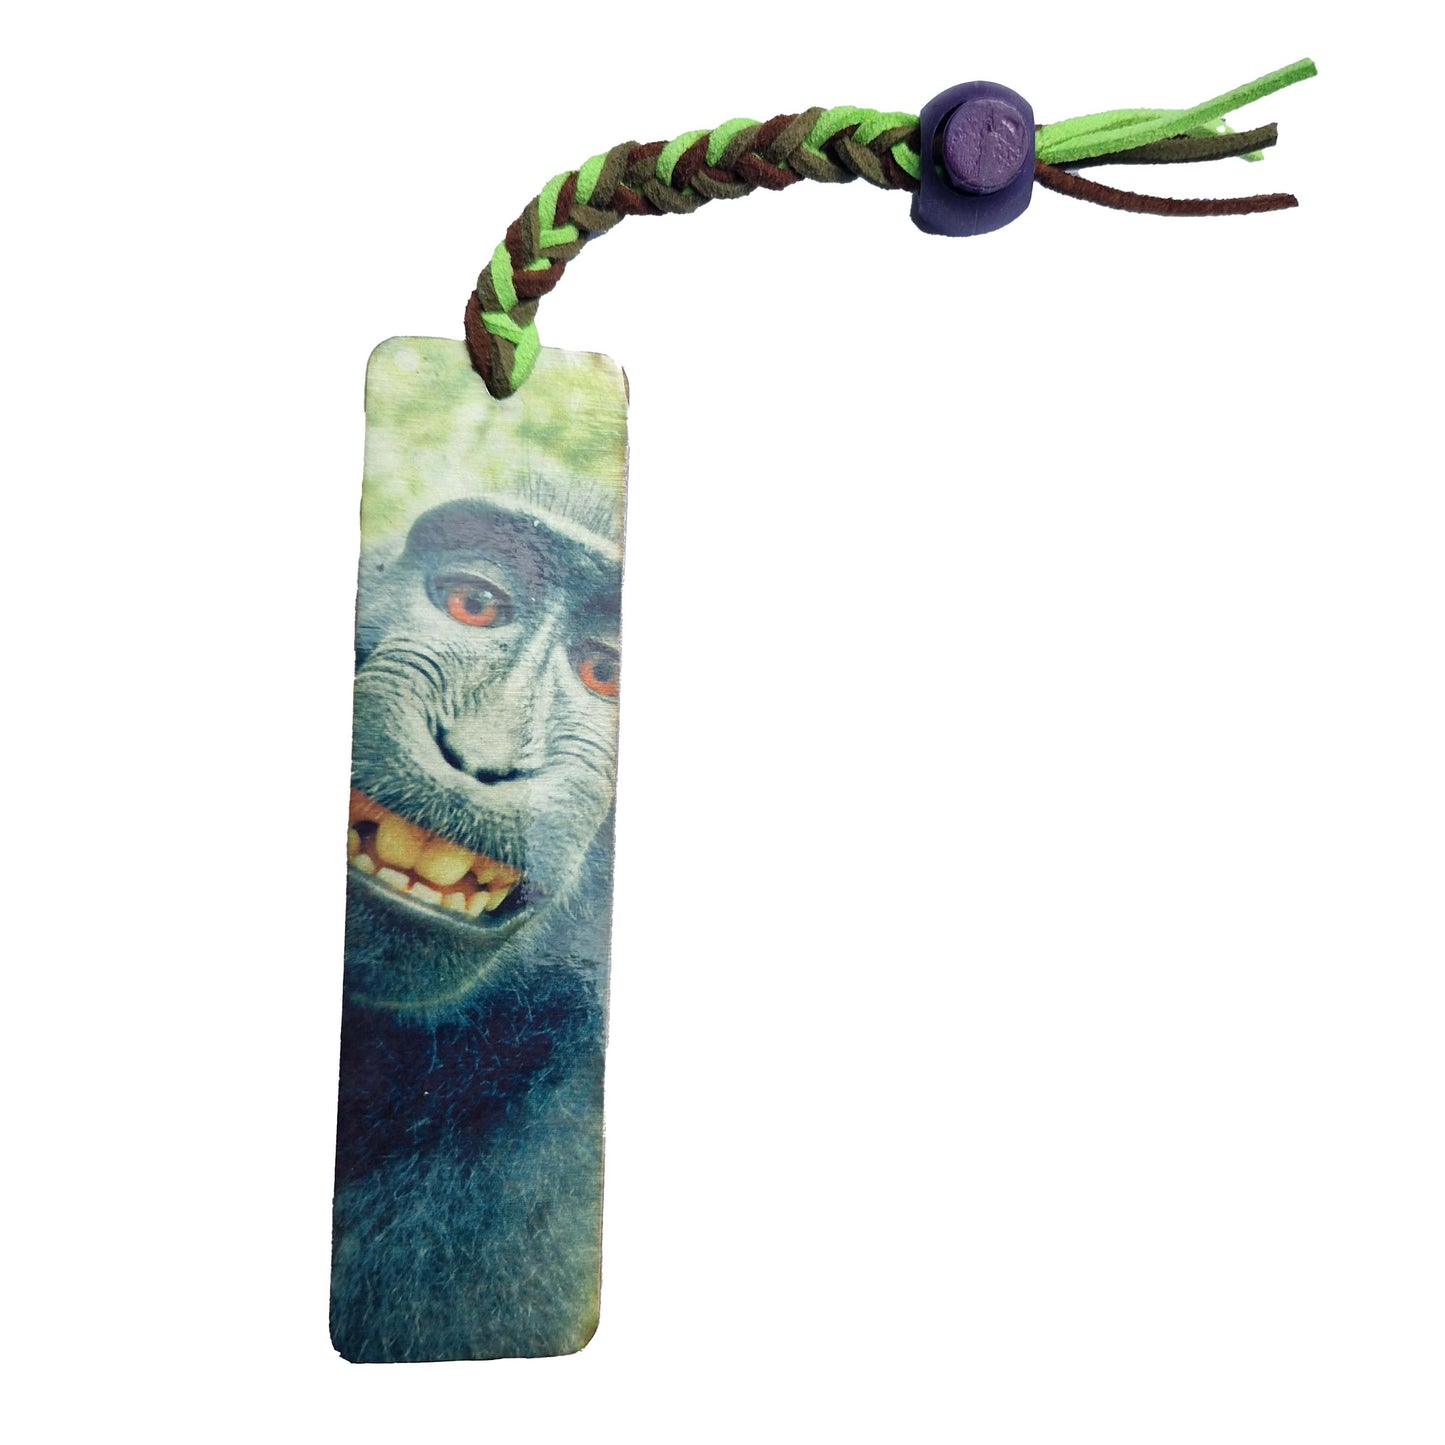 gifts for bookworms uk monkey bookmark